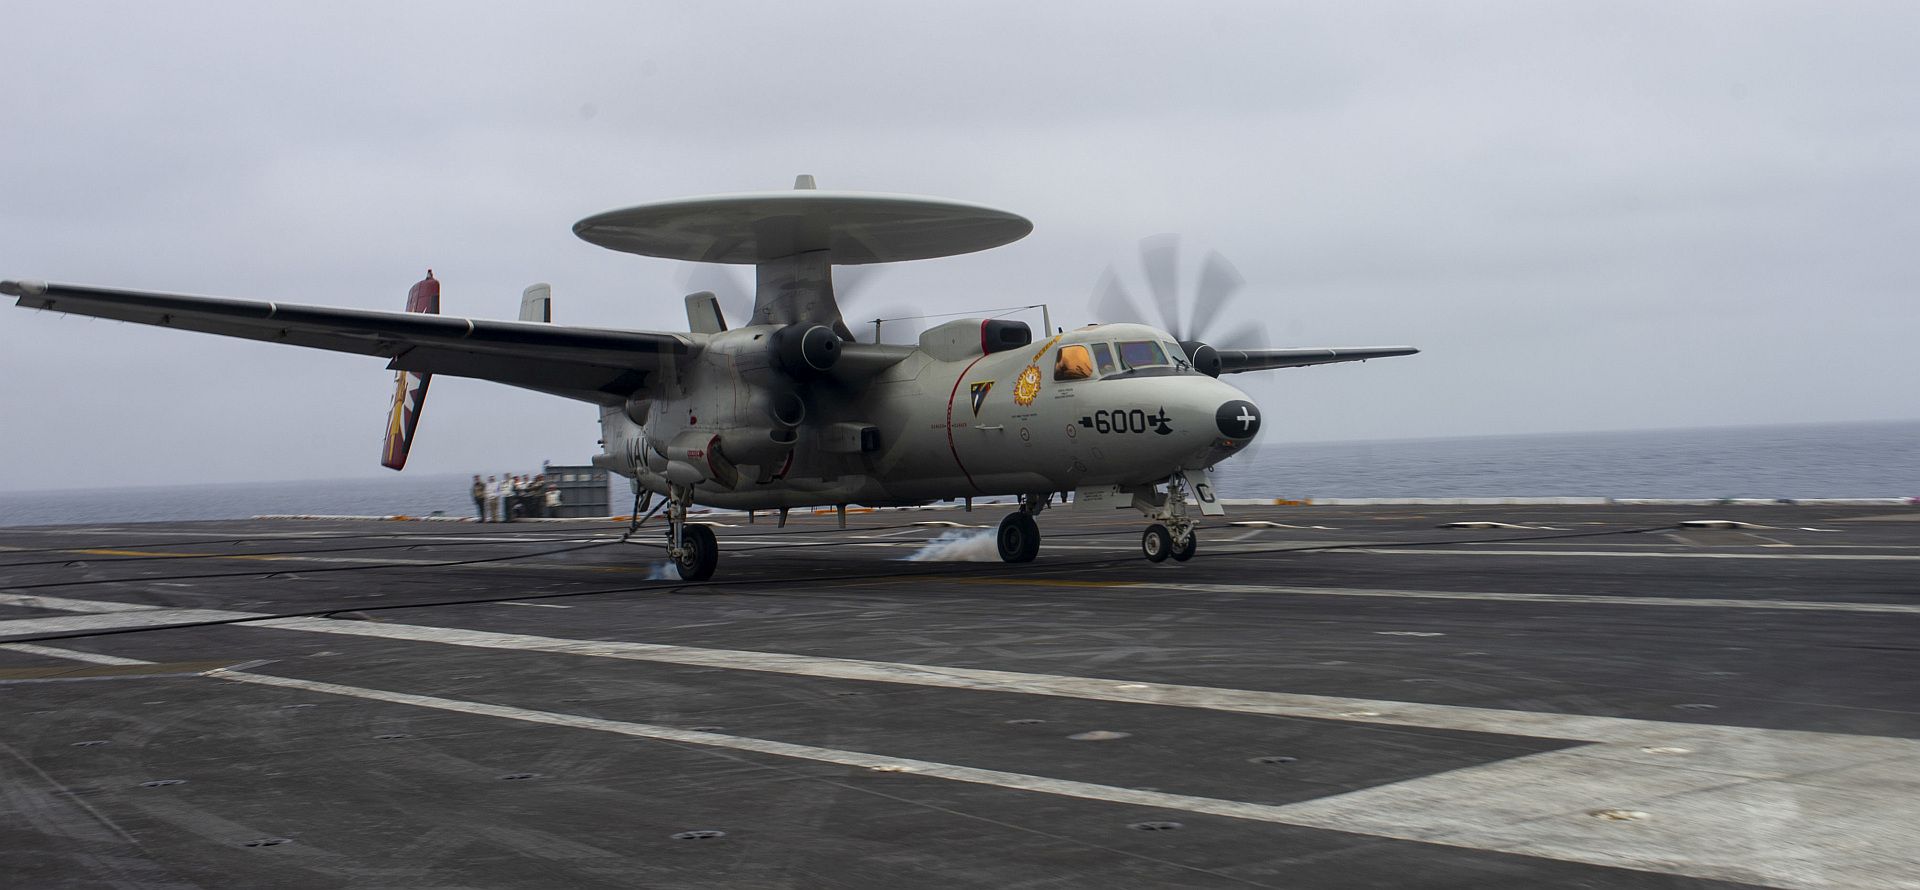 2C Hawkeye From The Sun Kings Of Carrier Airborne Early Warning Squadron 116 Makes An Arrested Gear Landing On The Flight Deck Of The Aircraft Carrier USS Nimitz